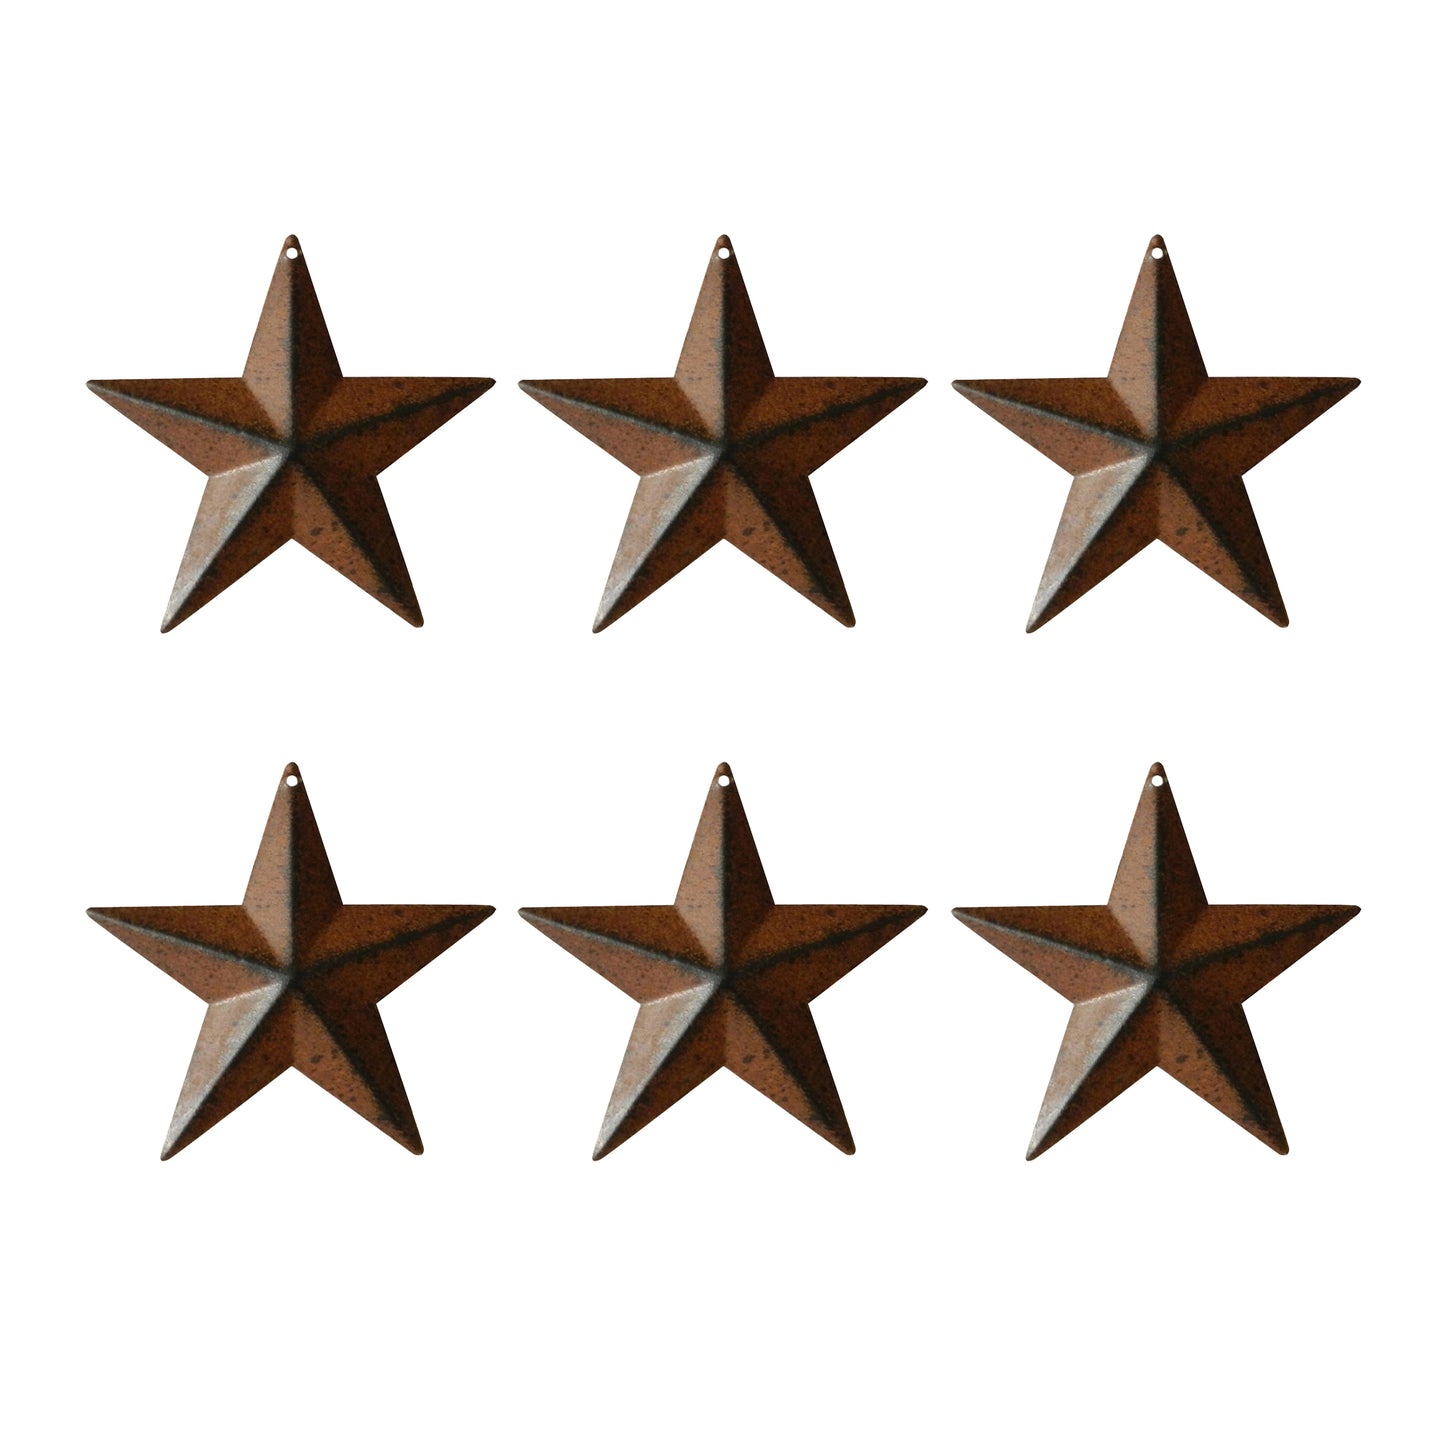 CVHOMEDECO. Country Rustic Antique Vintage Gifts Metal Barn Star Wall/Door Decor, 4 Inch, Set of 6. (Rusty)